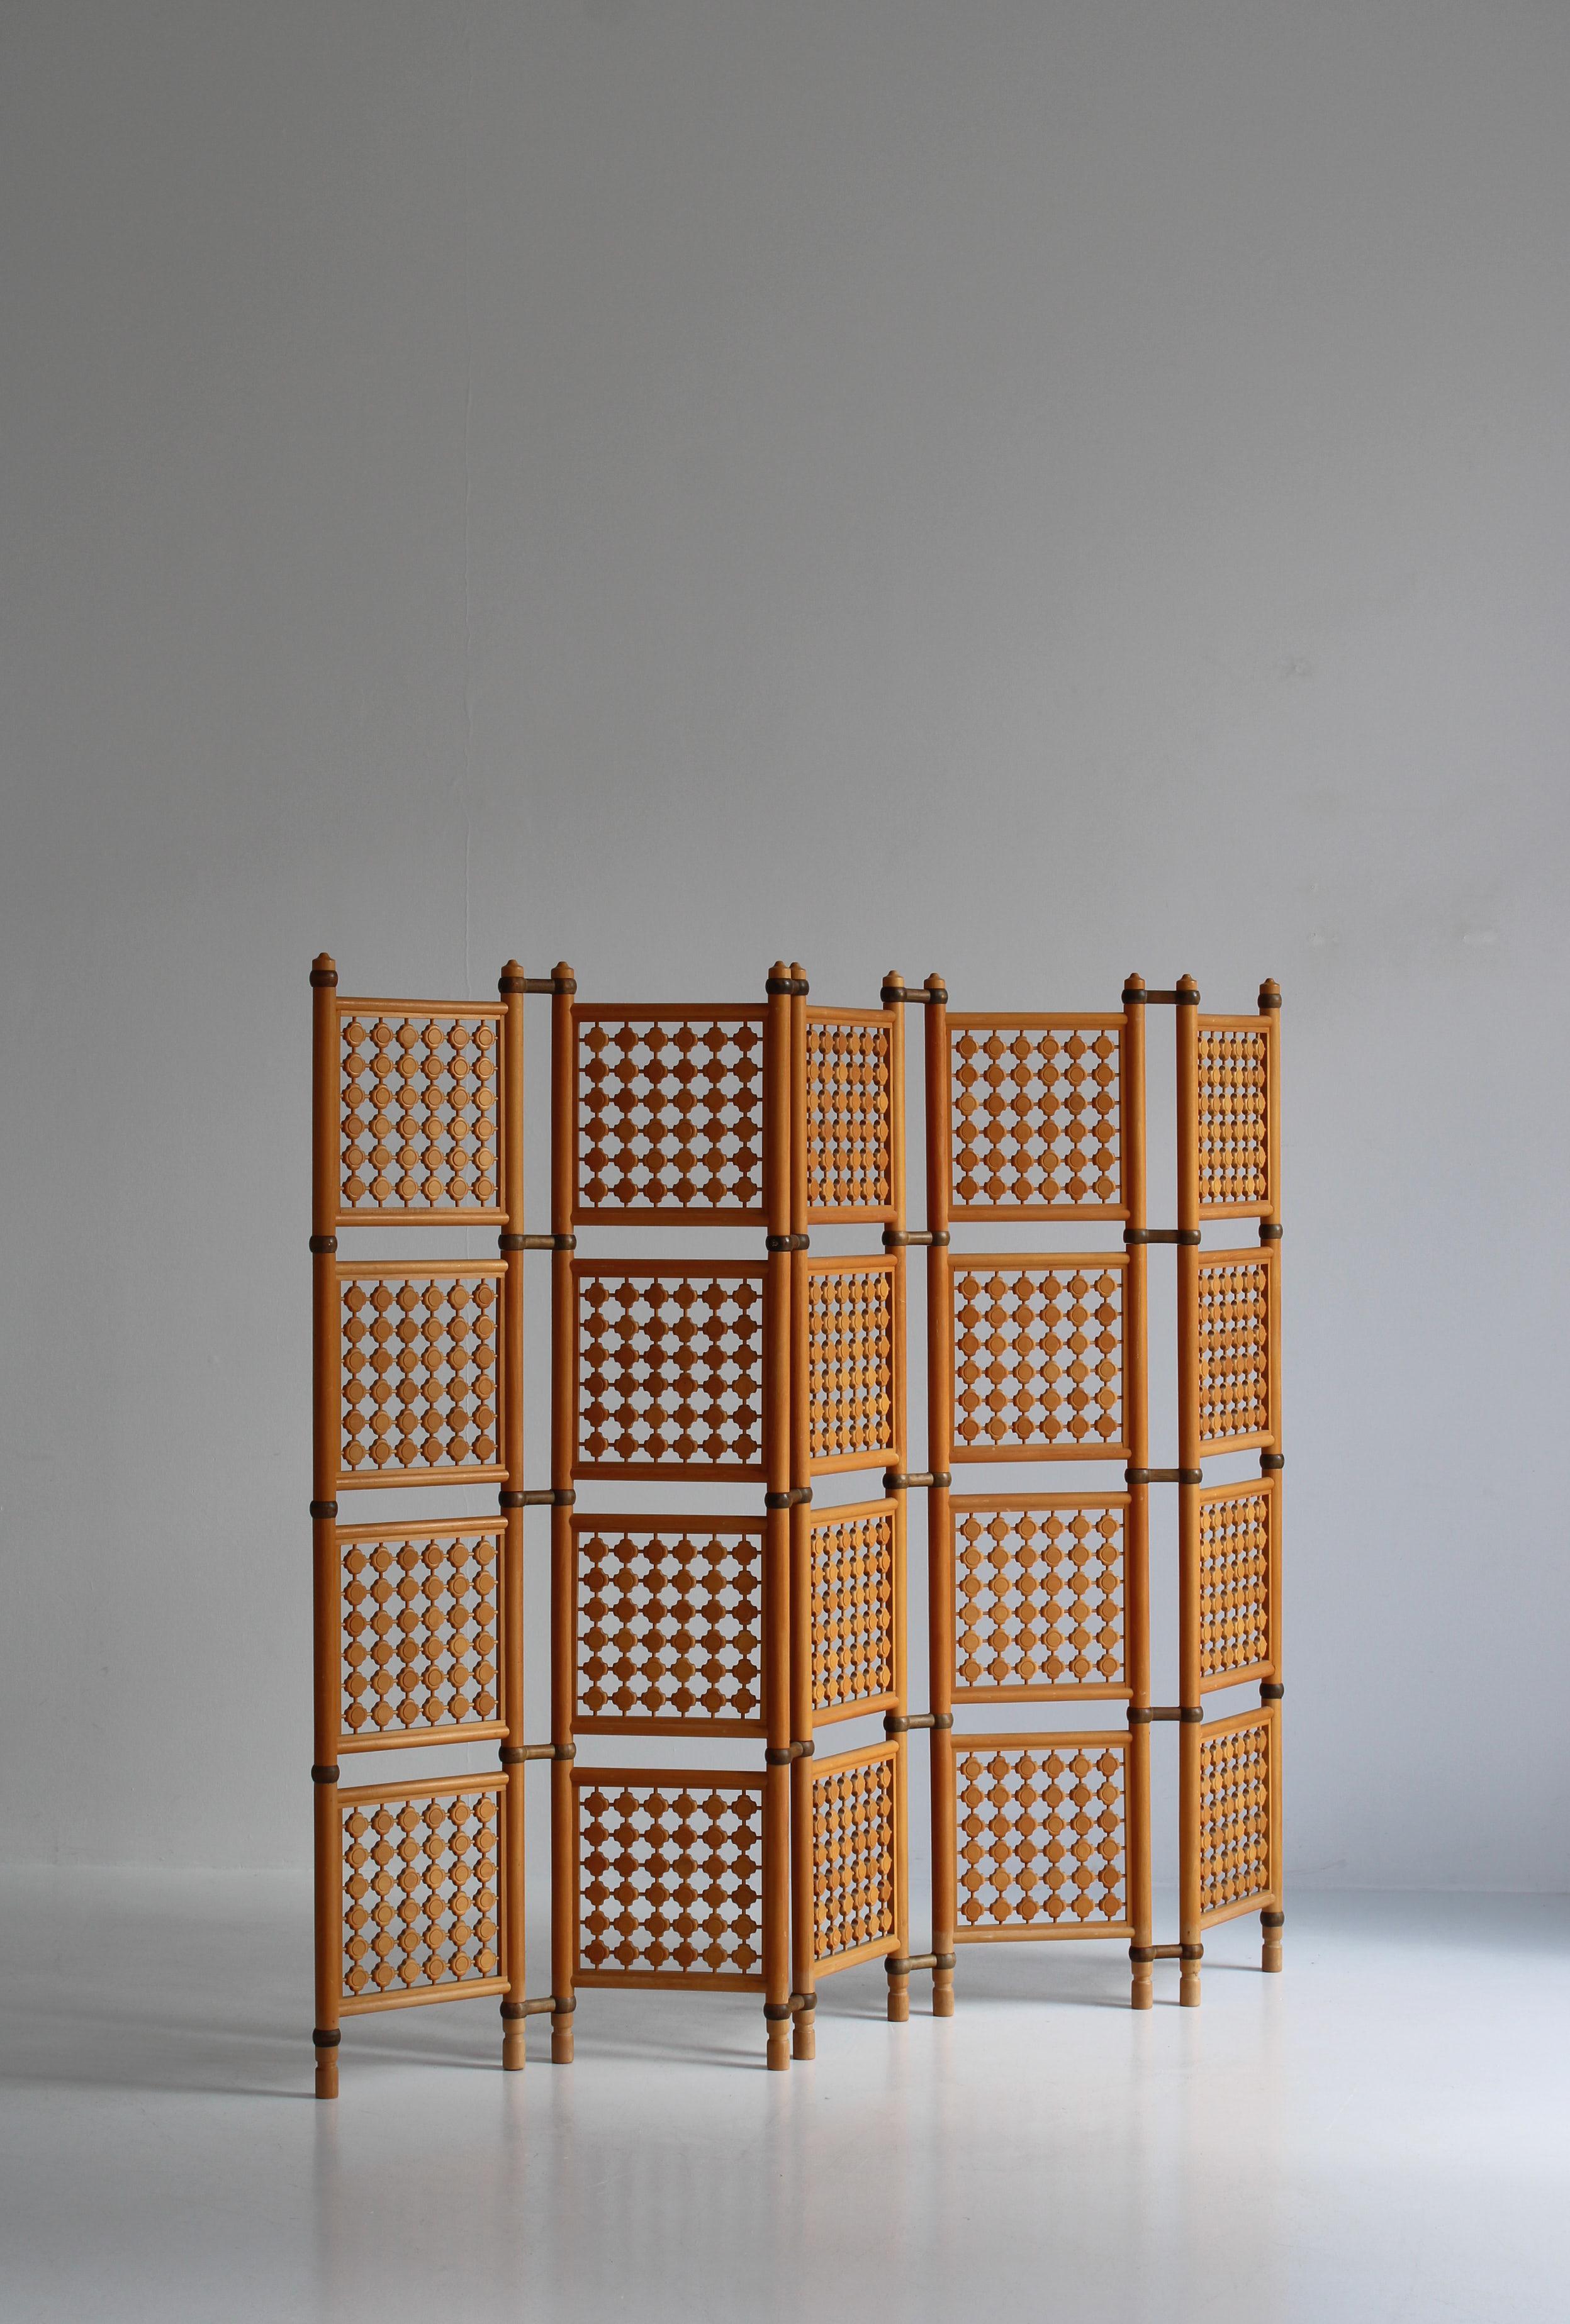 Mid-20th Century Set of Scandinavian Modern Screens or Room Dividers in Stained Beechwood, 1940s For Sale